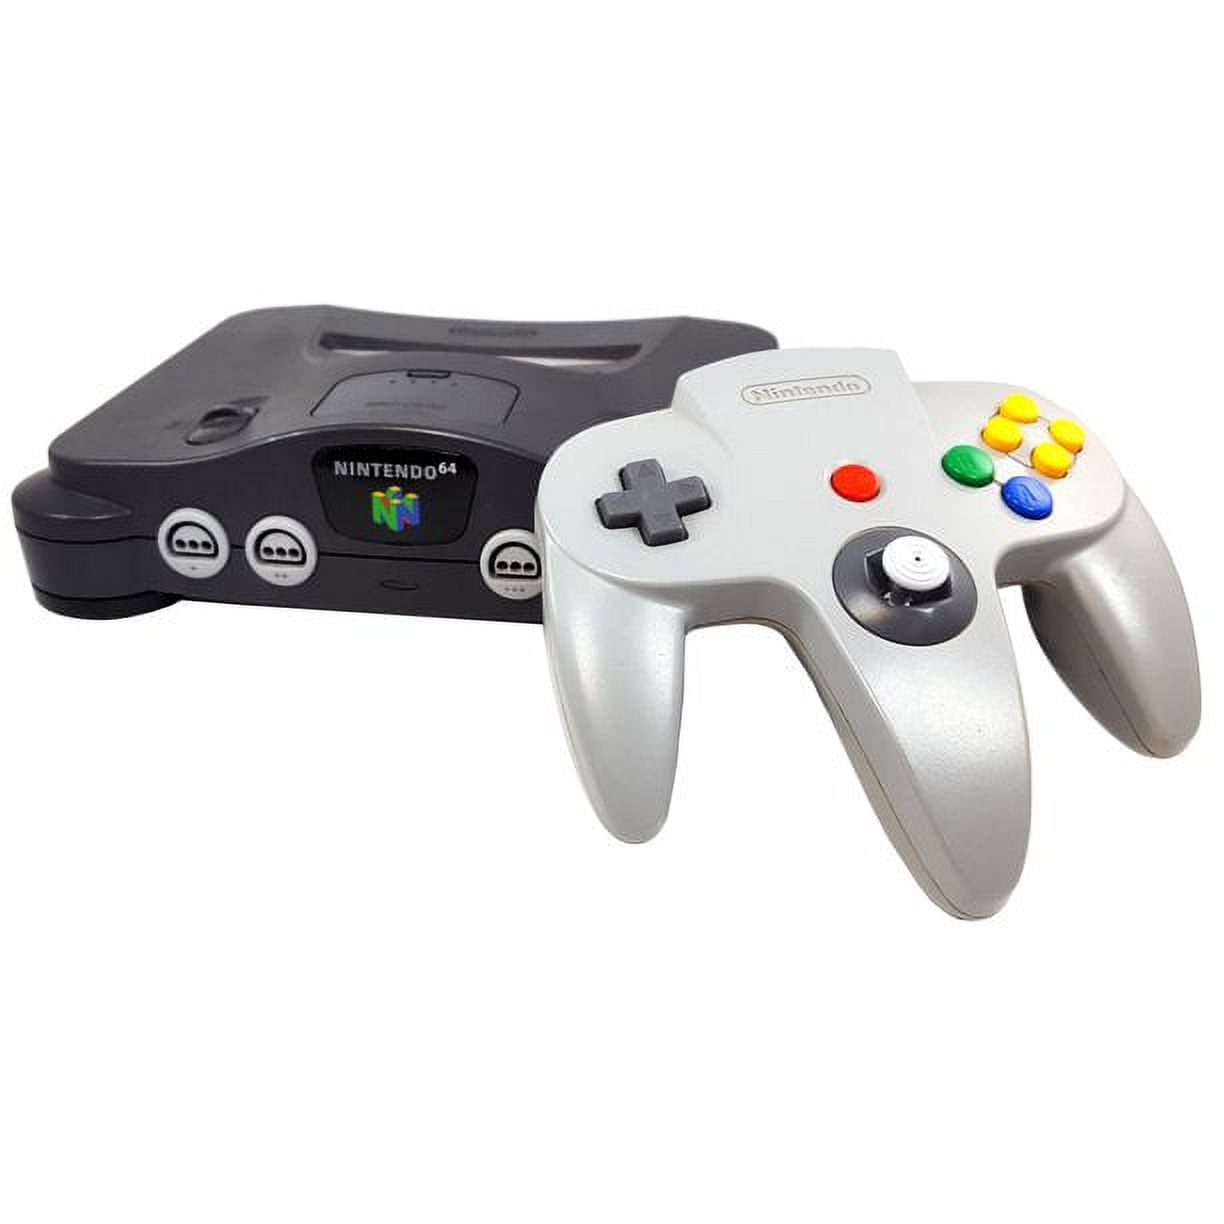 Restored Nintendo 64 Video Game Console with Controller and Cables (Refurbished) - image 1 of 4